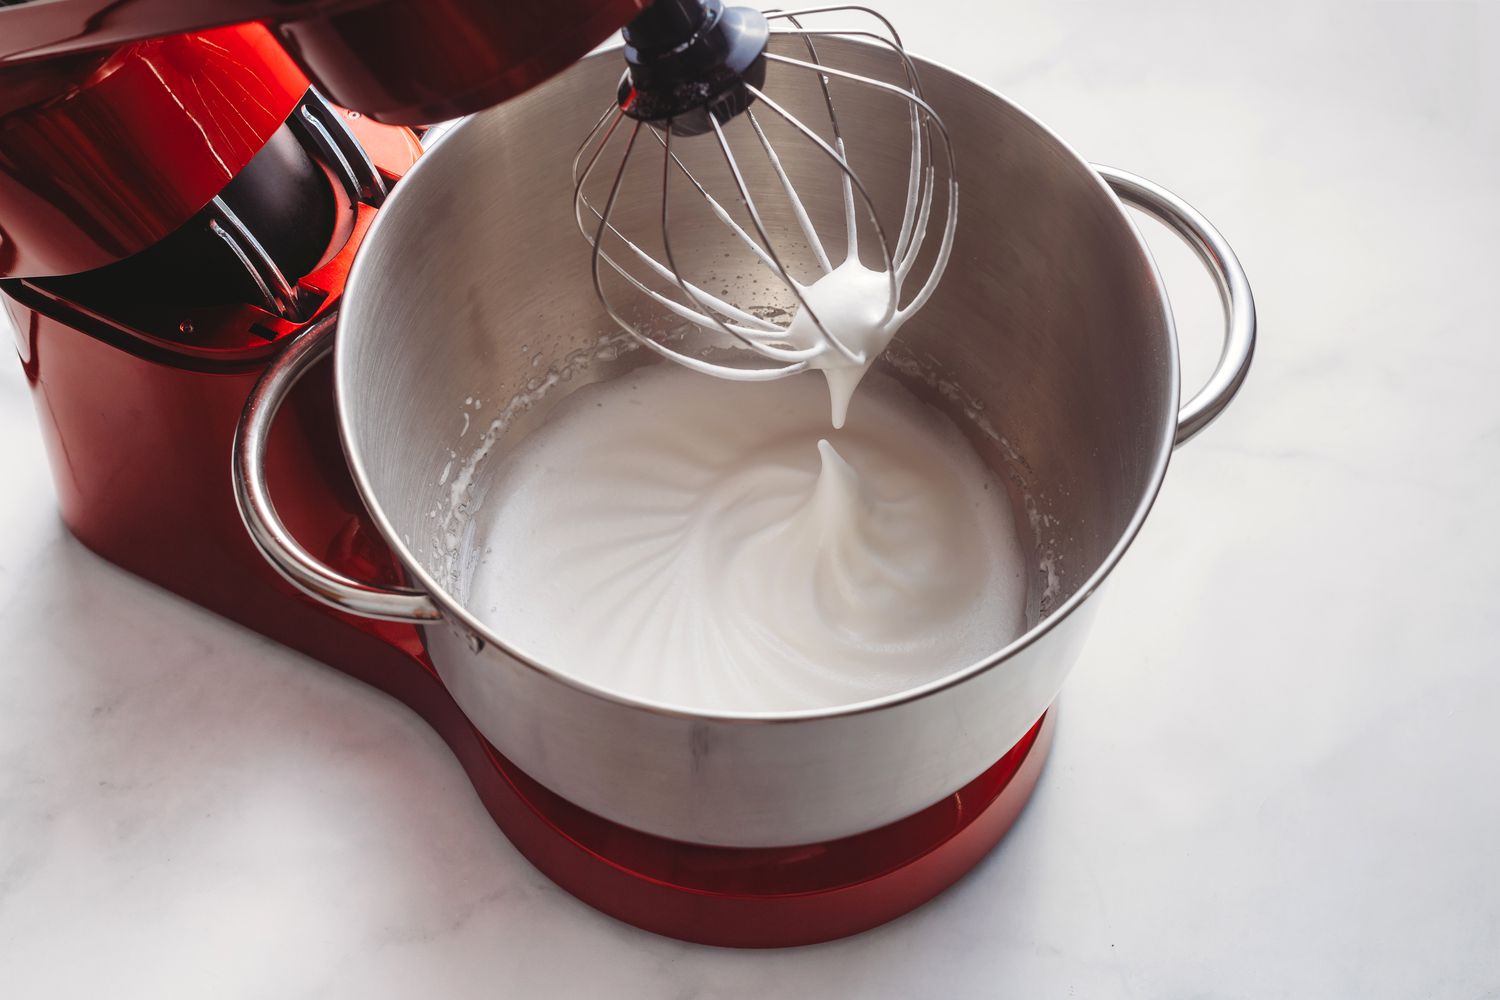 Egg whites and sugar beaten to soft peaks in a stand mixer 